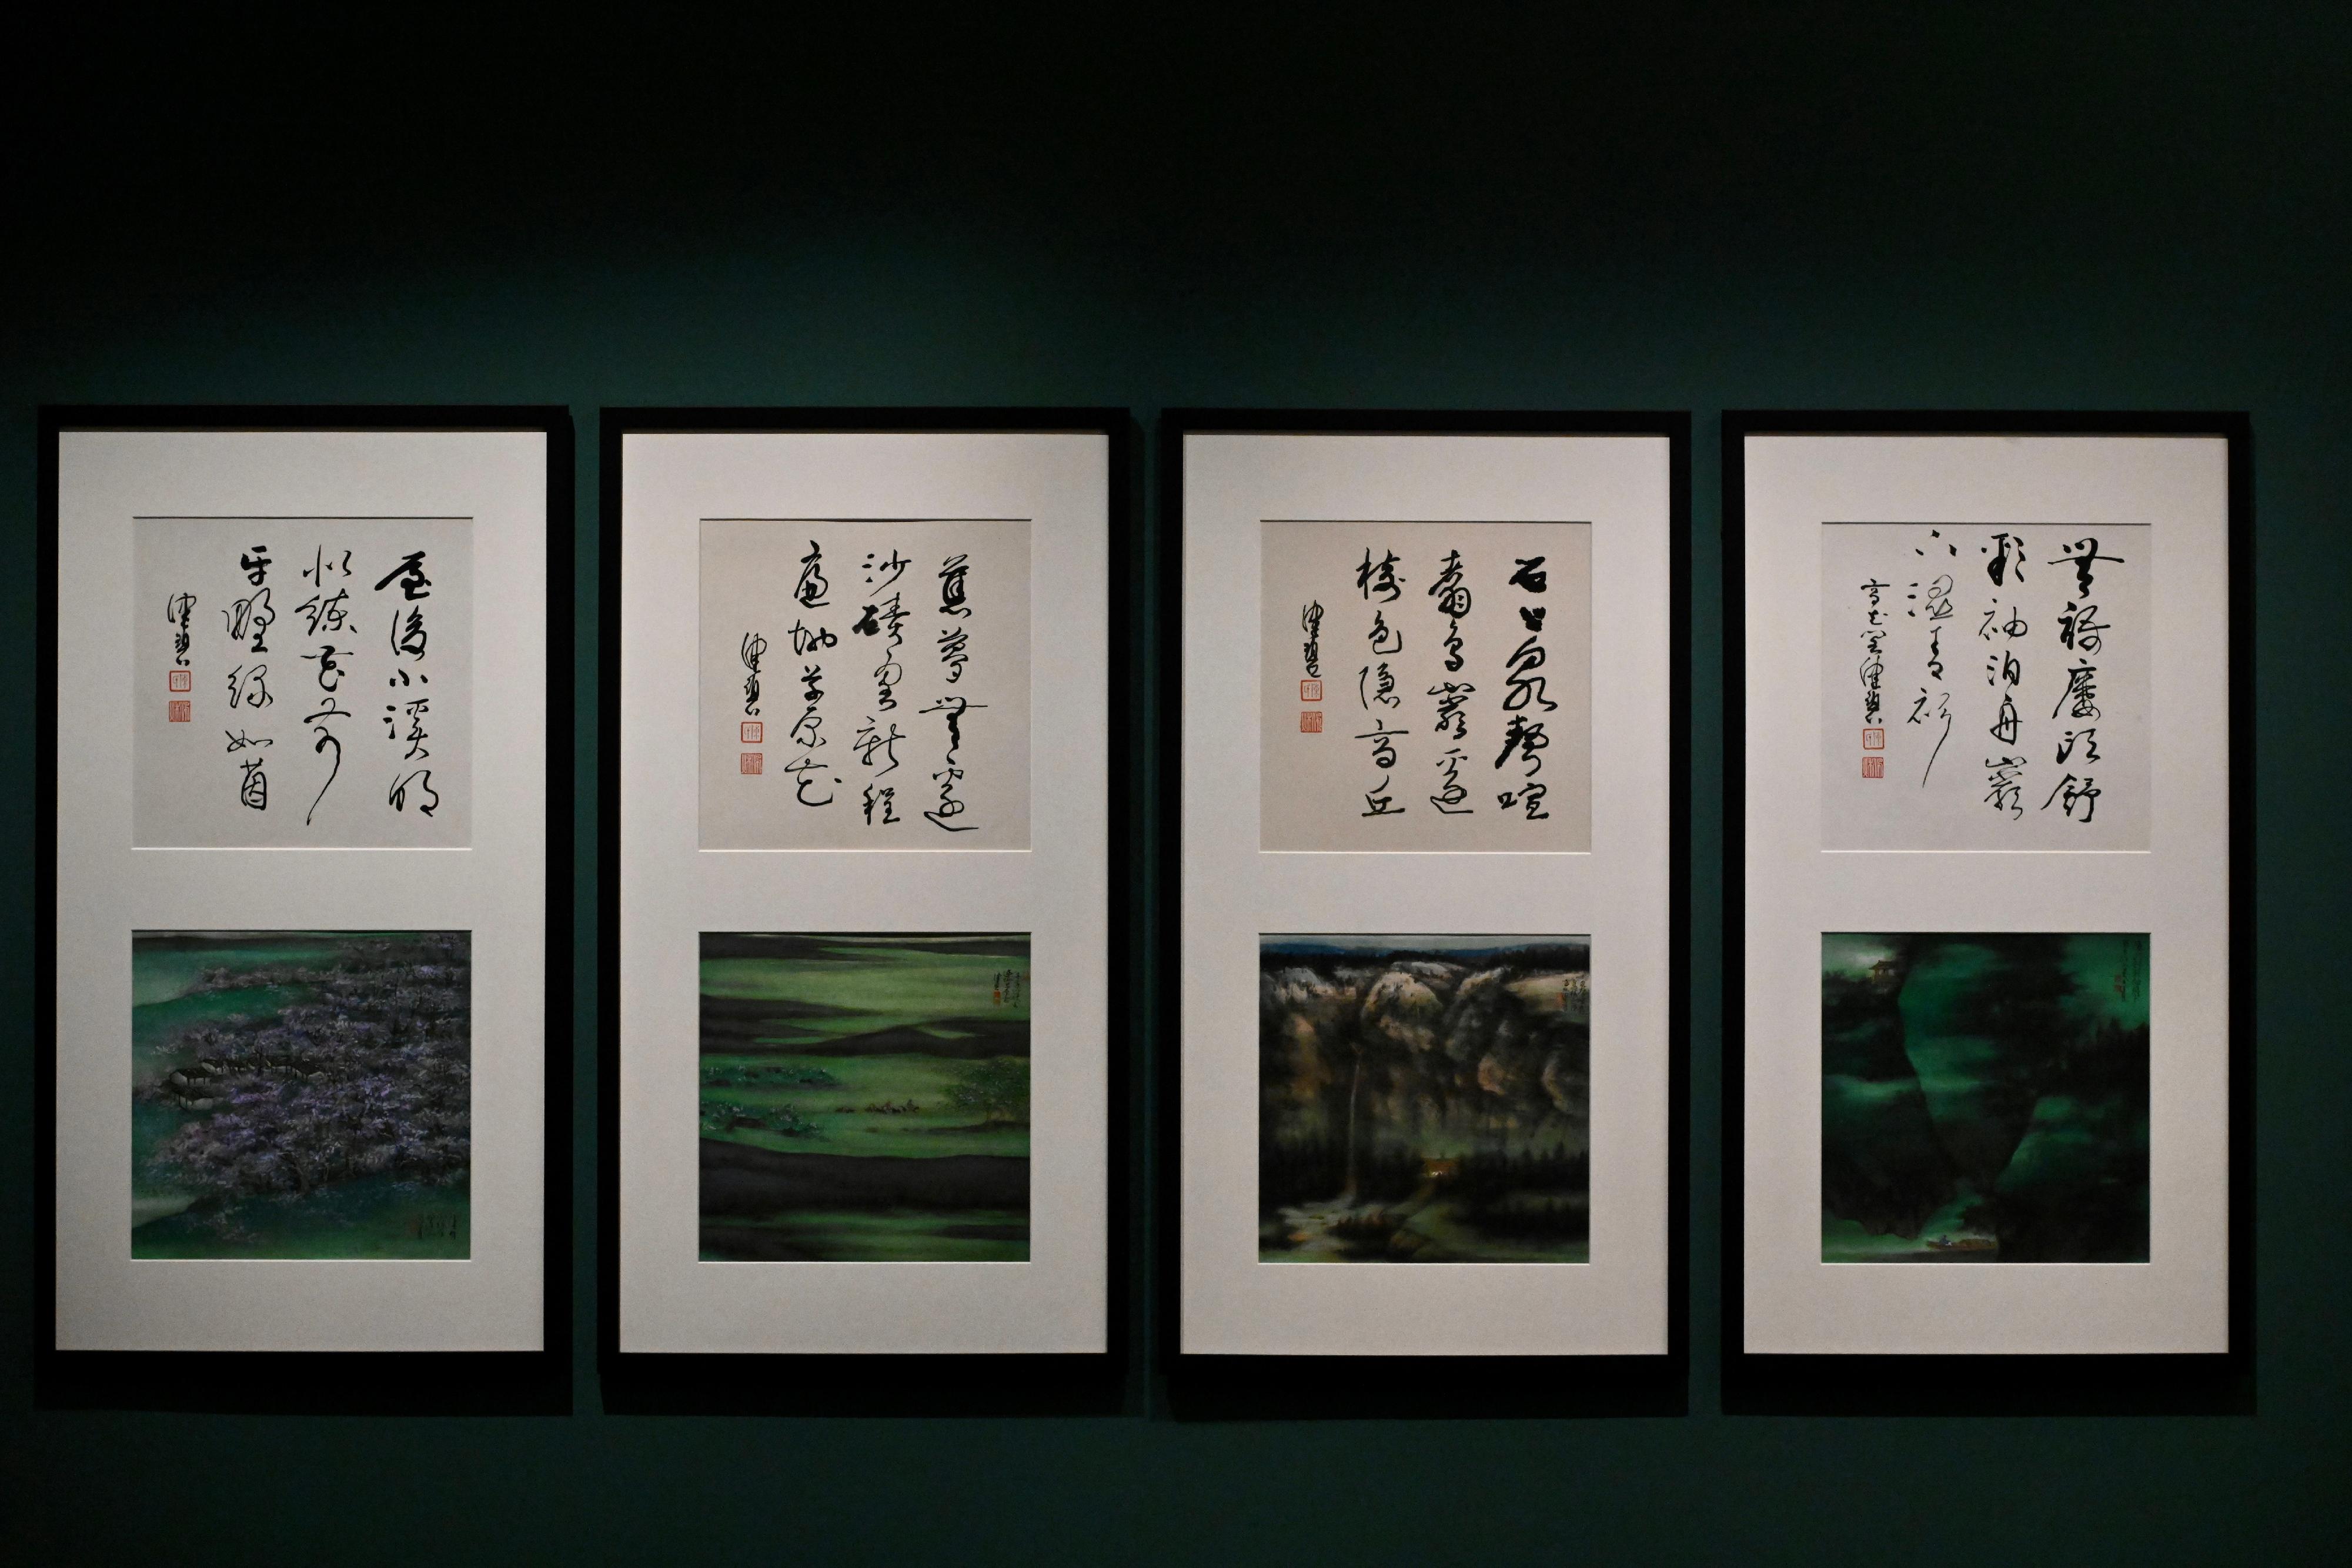 "A Match Made in Painting: Selected Works of Xie Zhiliu and Chen Peiqiu from the Jingguanlou Collection" exhibition will be held at the Hong Kong Museum of Art from tomorrow (July 14). Picture shows Chen Peiqiu's "Landscape and calligraphy" album of 12 double leaves (selected).

